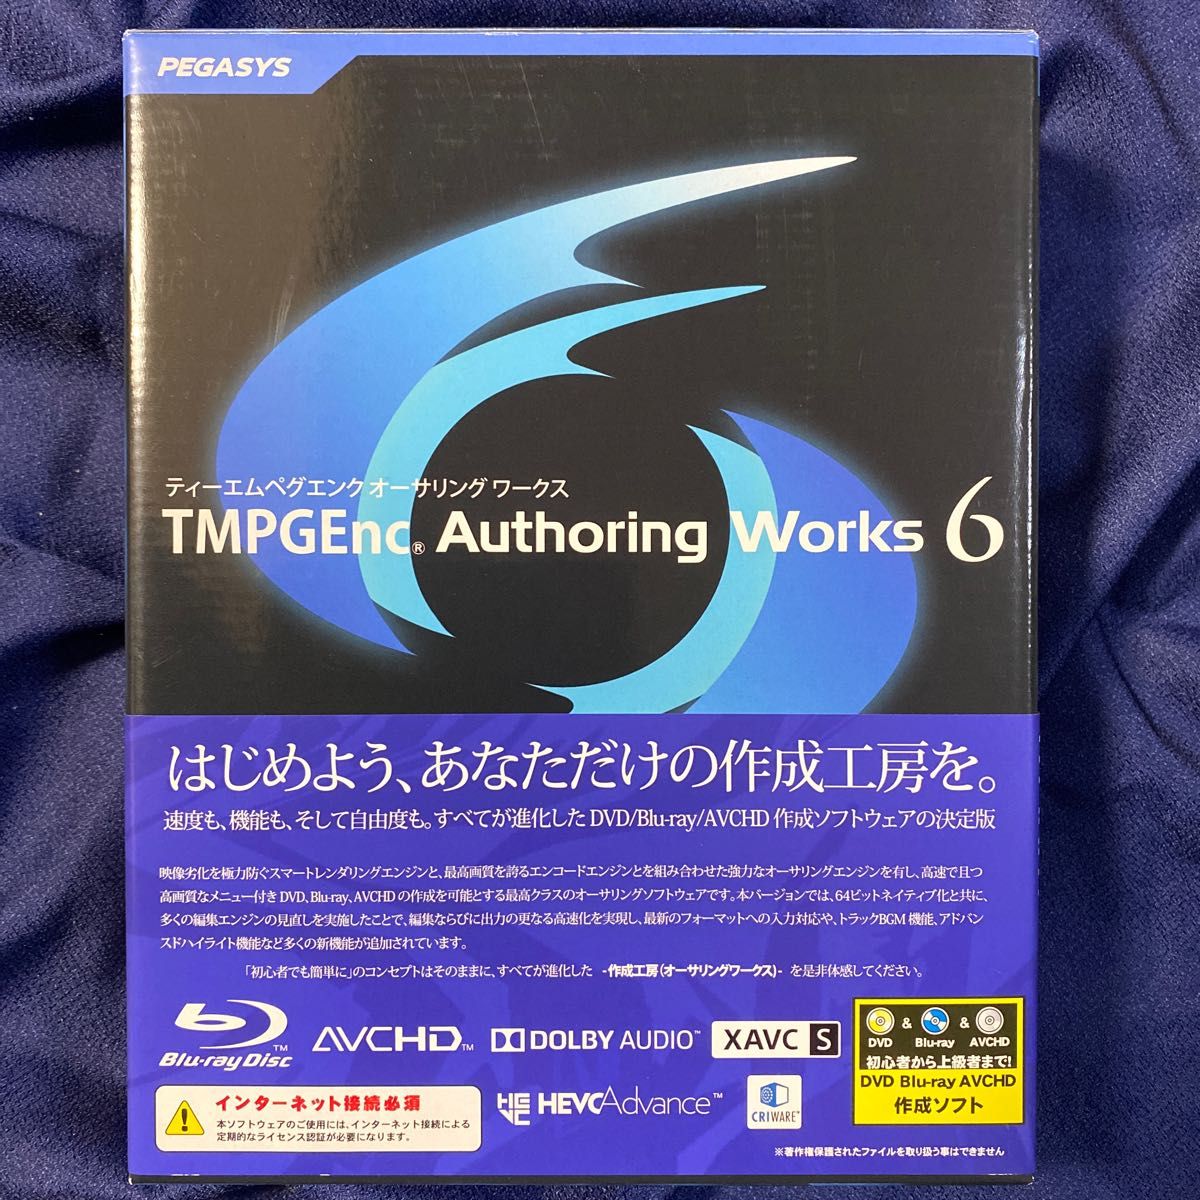 TMPGEnc Authoring Works 6｜PayPayフリマ